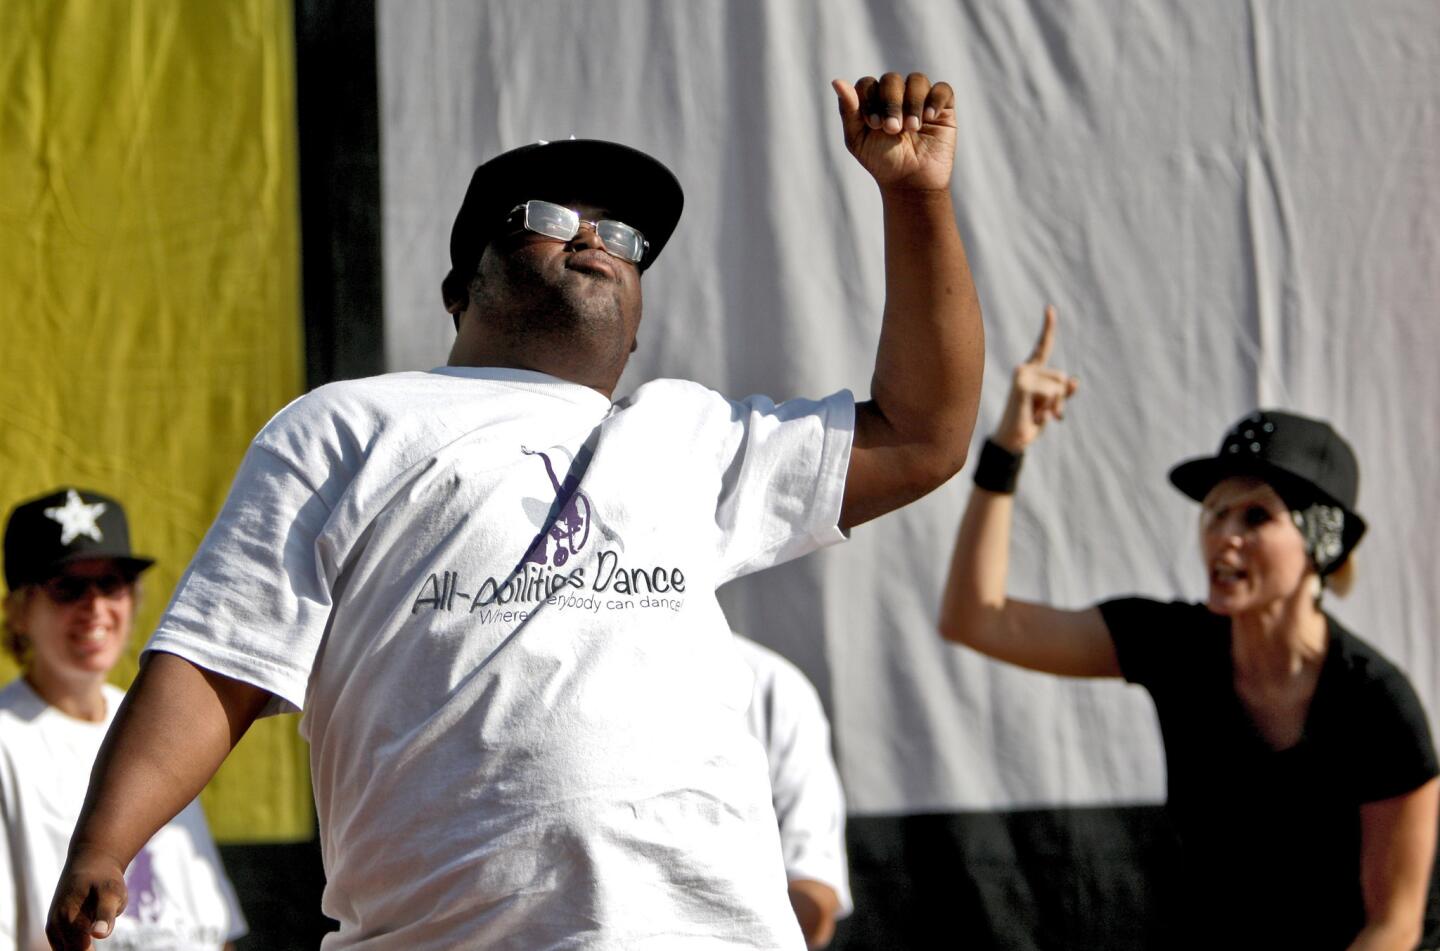 John Tucker, 28 of L.A., dances during performance by Burbank's All Abilities Dance group, at the 37th annual Very Special Arts Festival at the Music Center in Los Angeles on Friday, October 23, 2015.